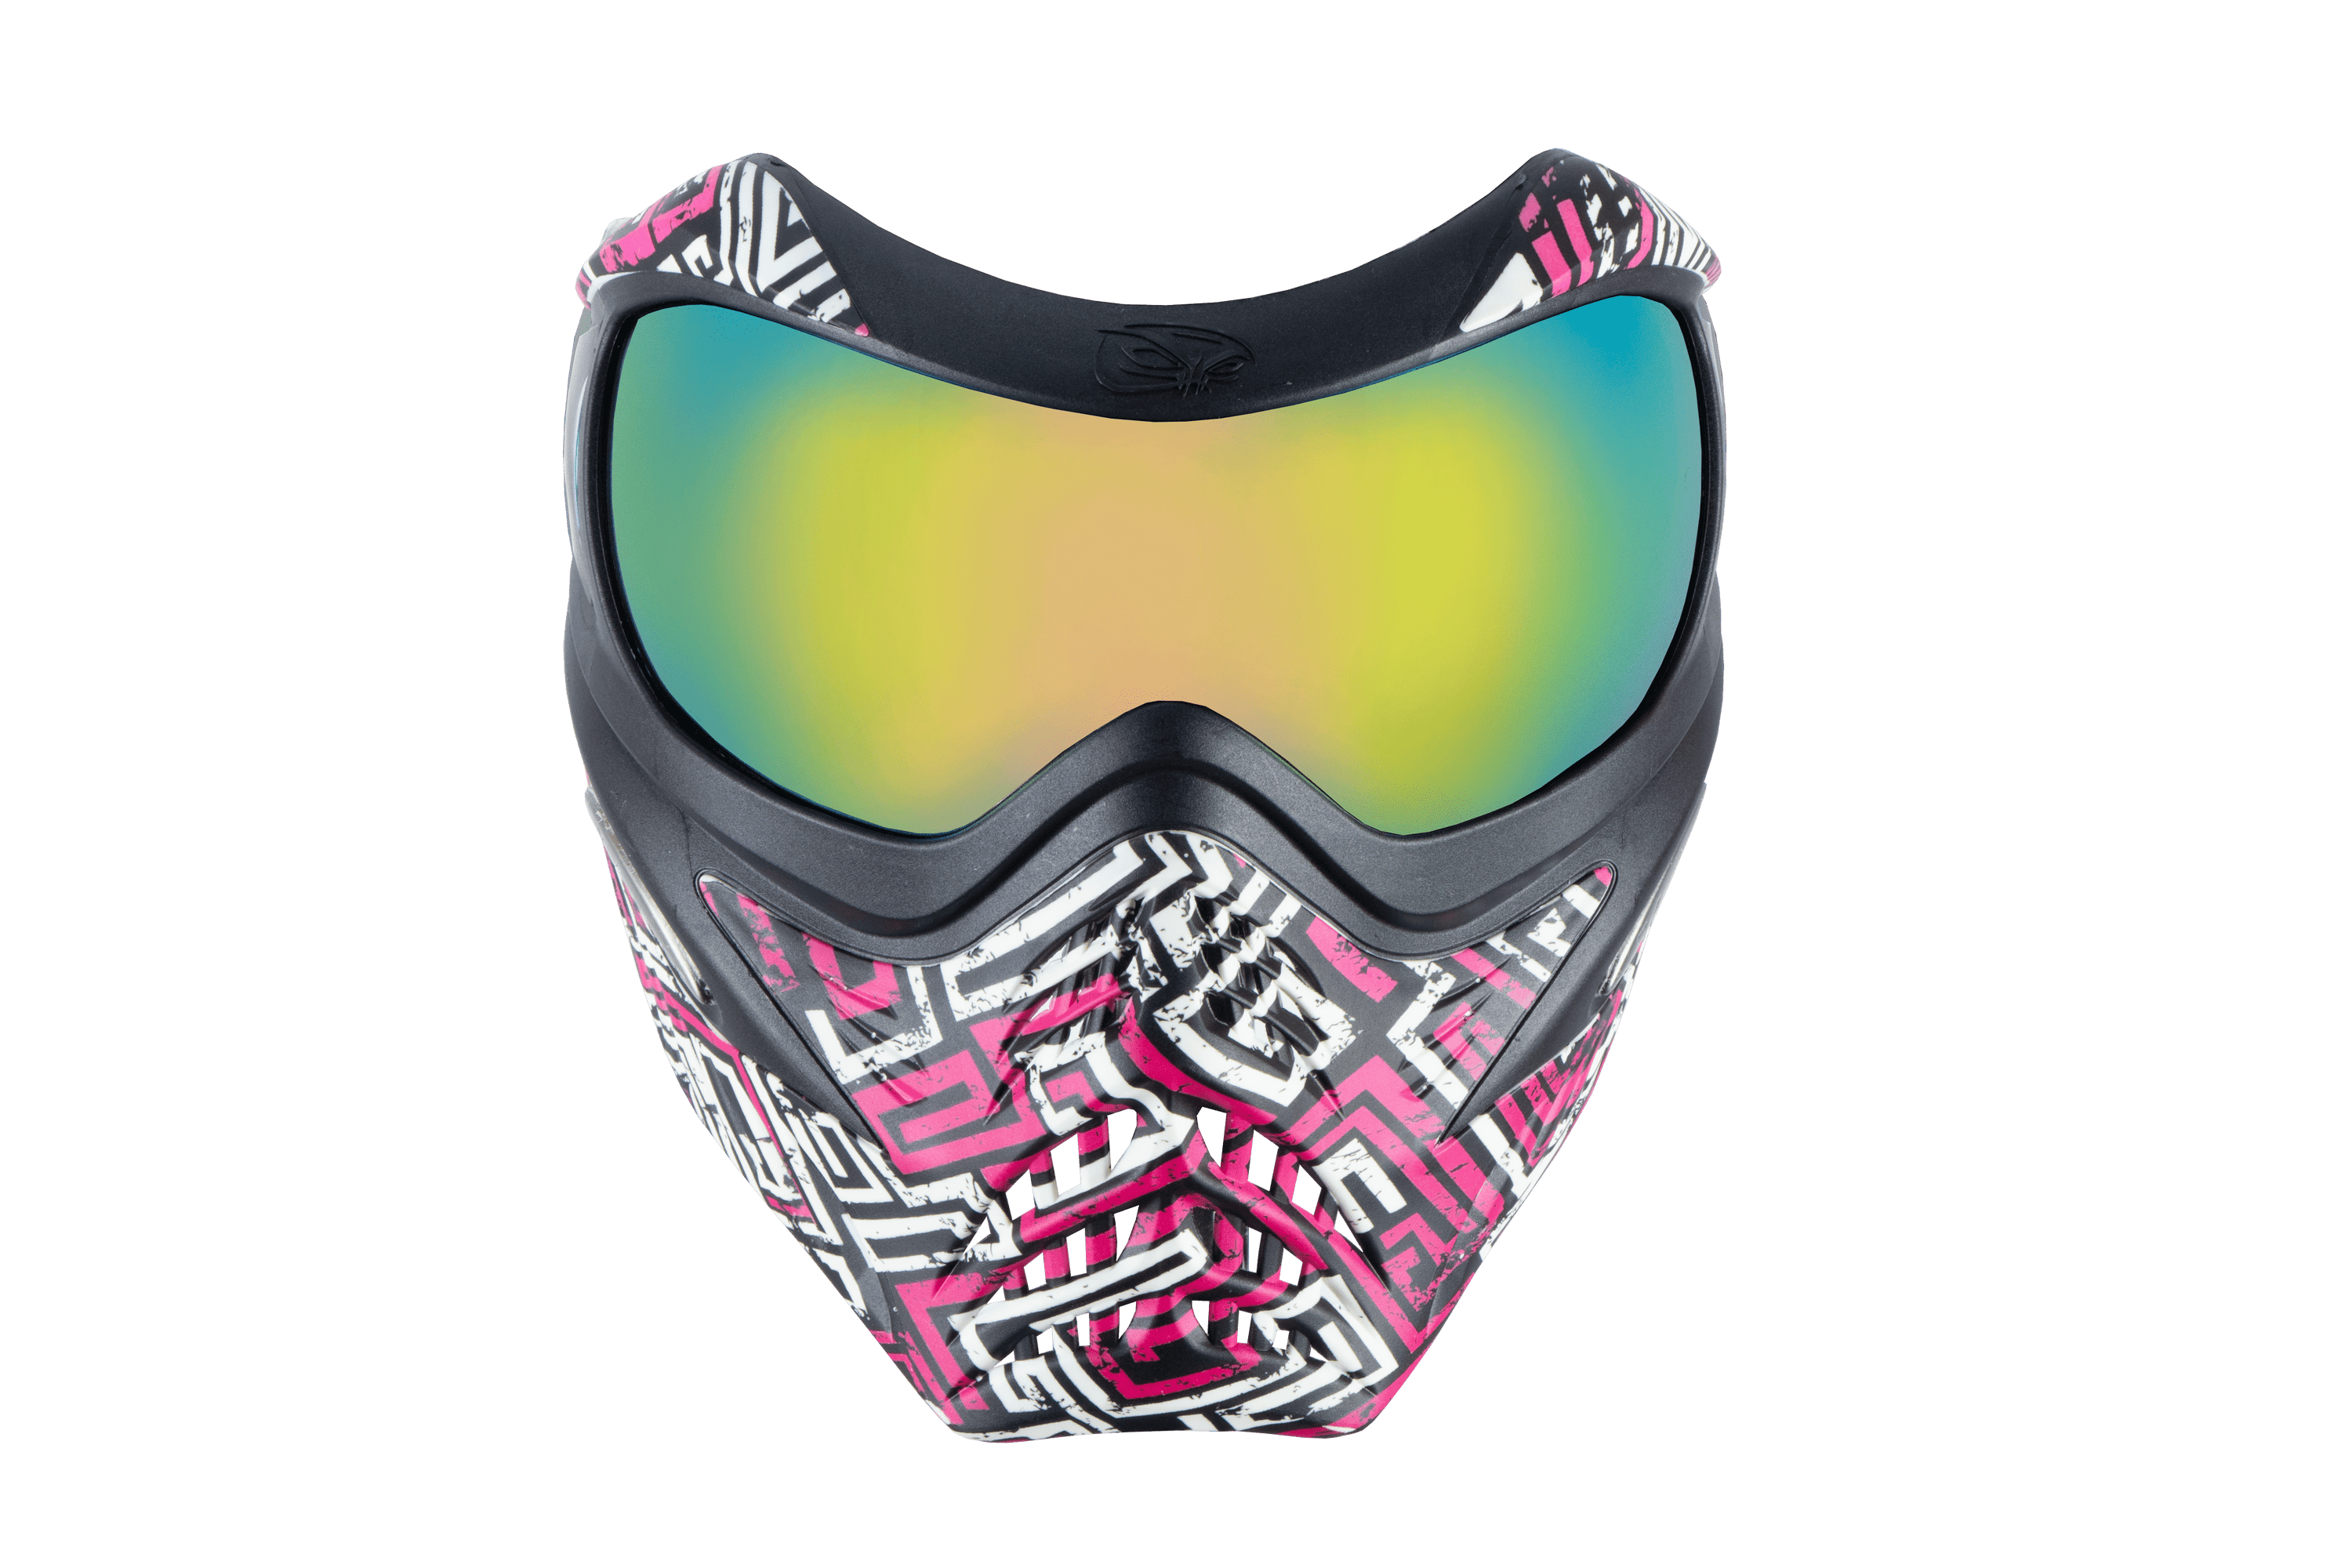 VForce Grill SE Street Magenta - Eminent Paintball And Airsoft